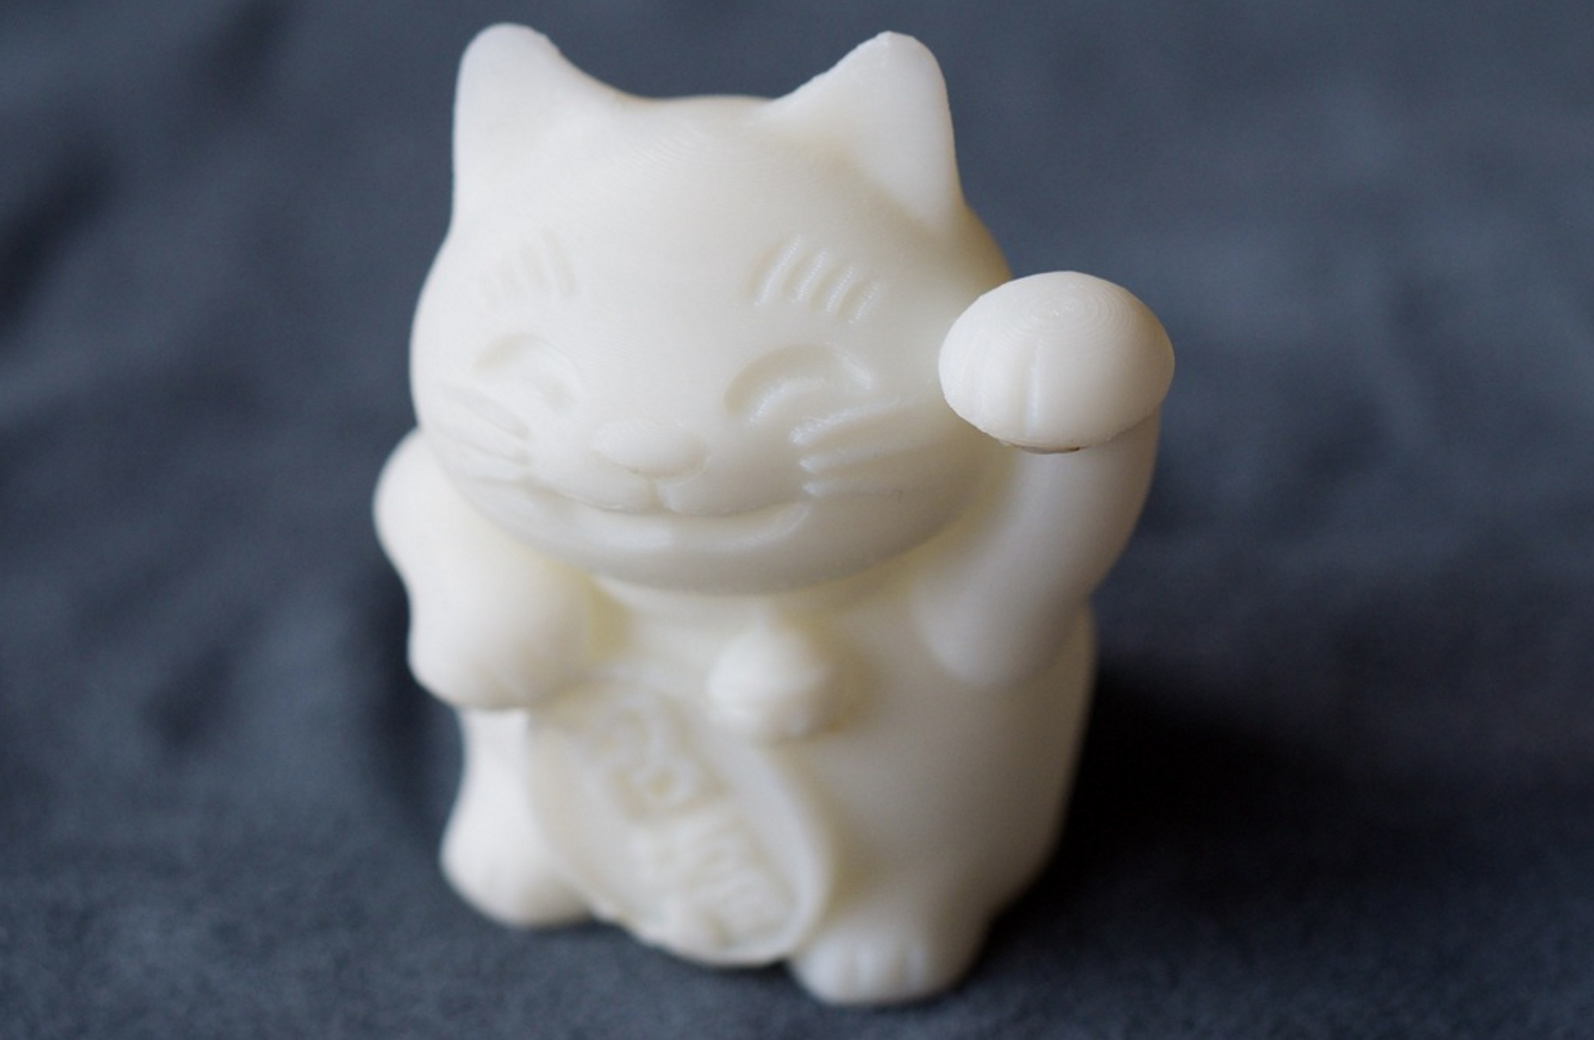 Japanese Lucky Cats 3D Printed - / Show and tell - Talk Manufacturing | Hubs